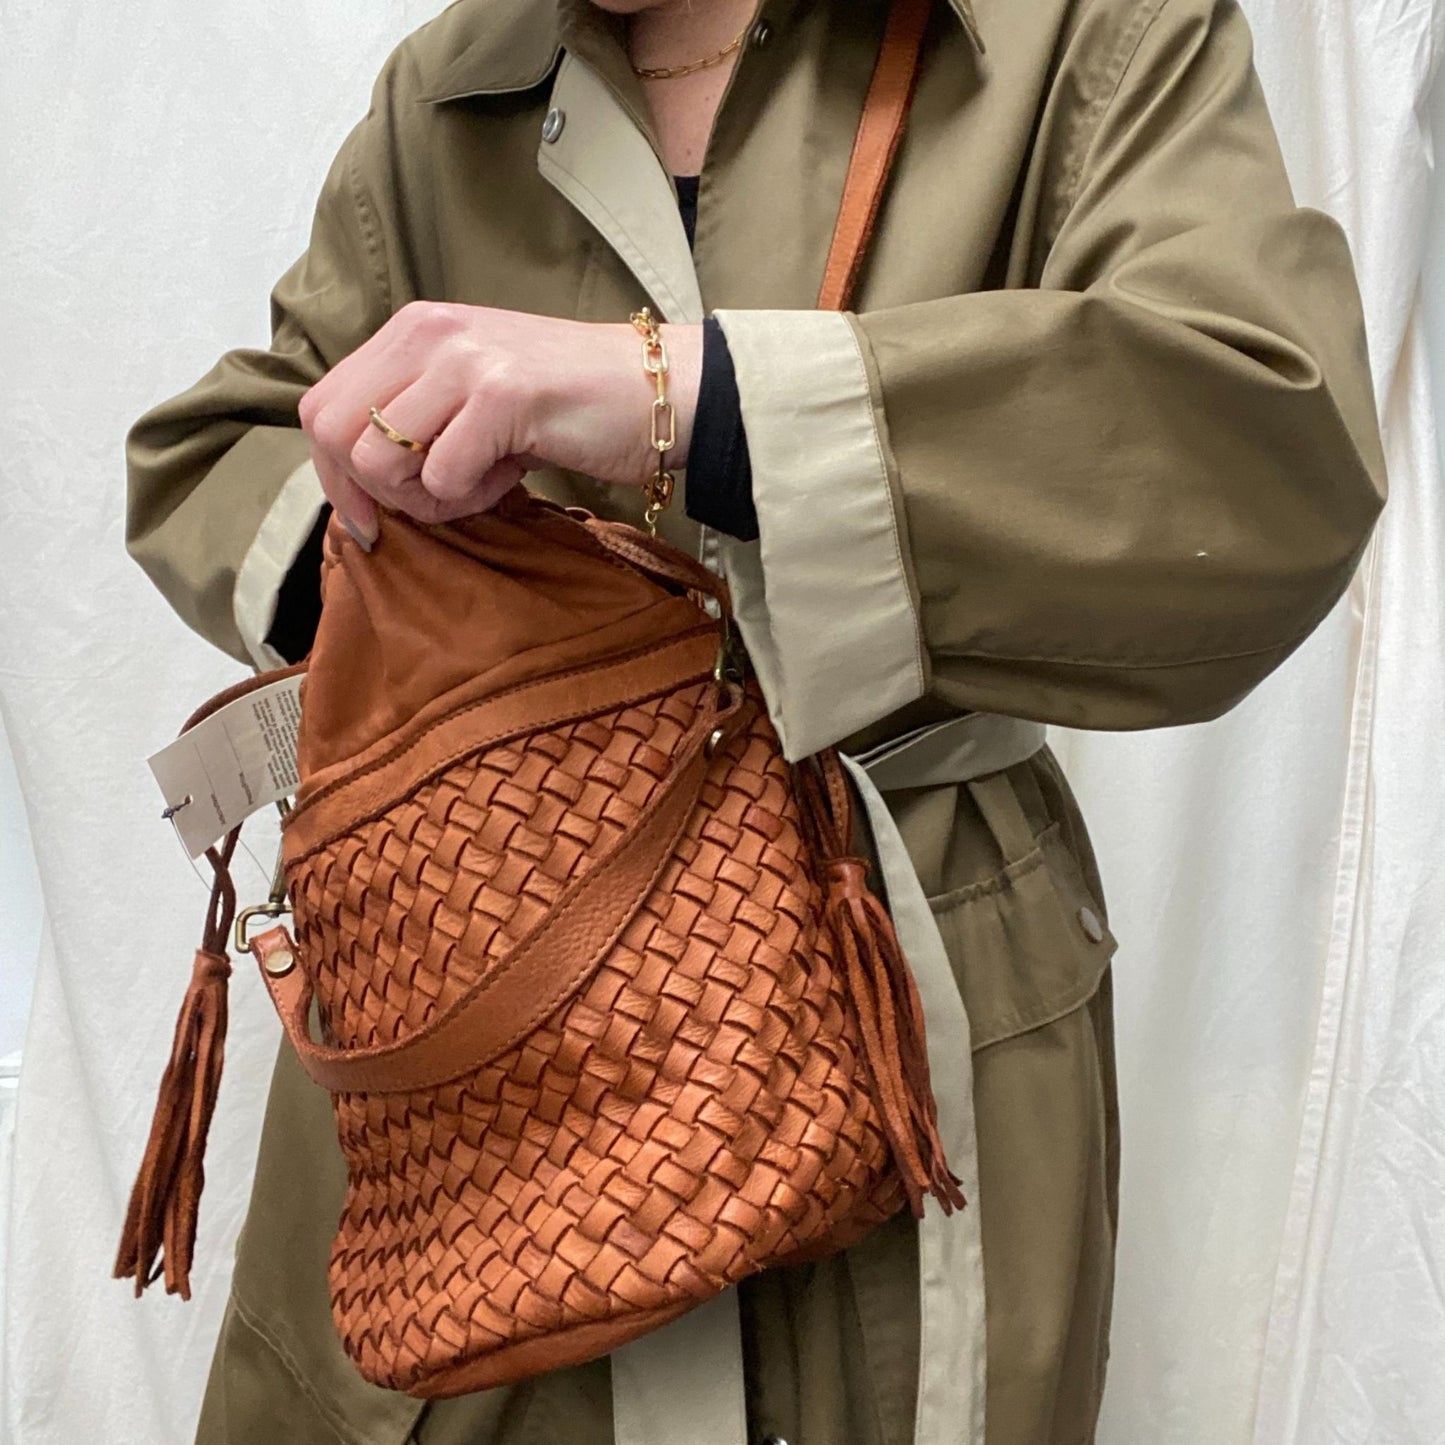 The Washed Leather Woven Leather Bucket Bag